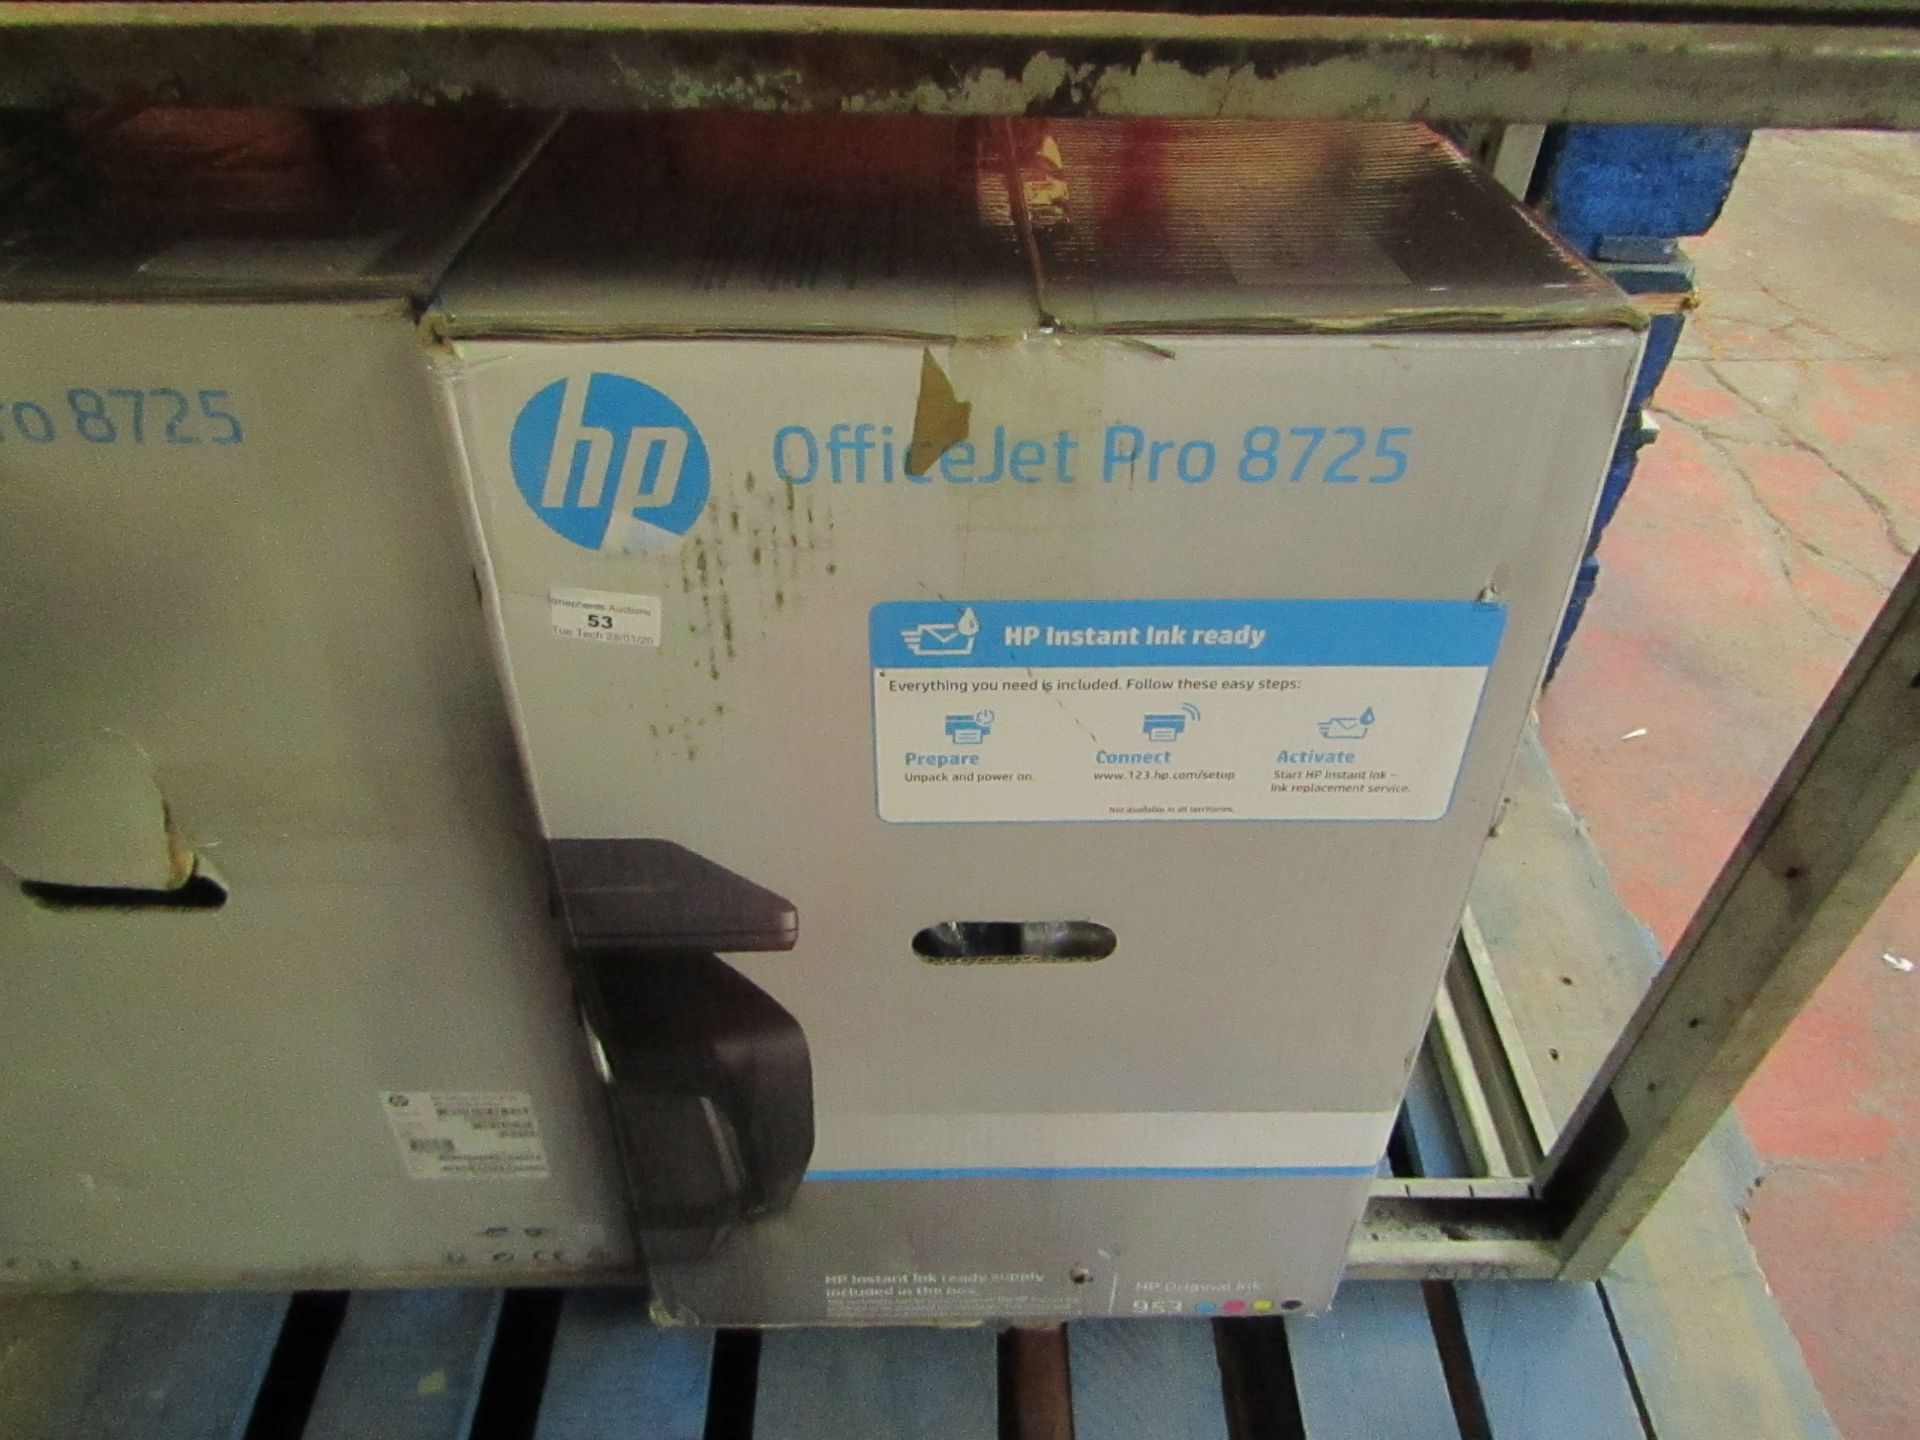 HP OfficeJet Pro 8725 multi-functional printer, untested and boxed. RRP £200.00